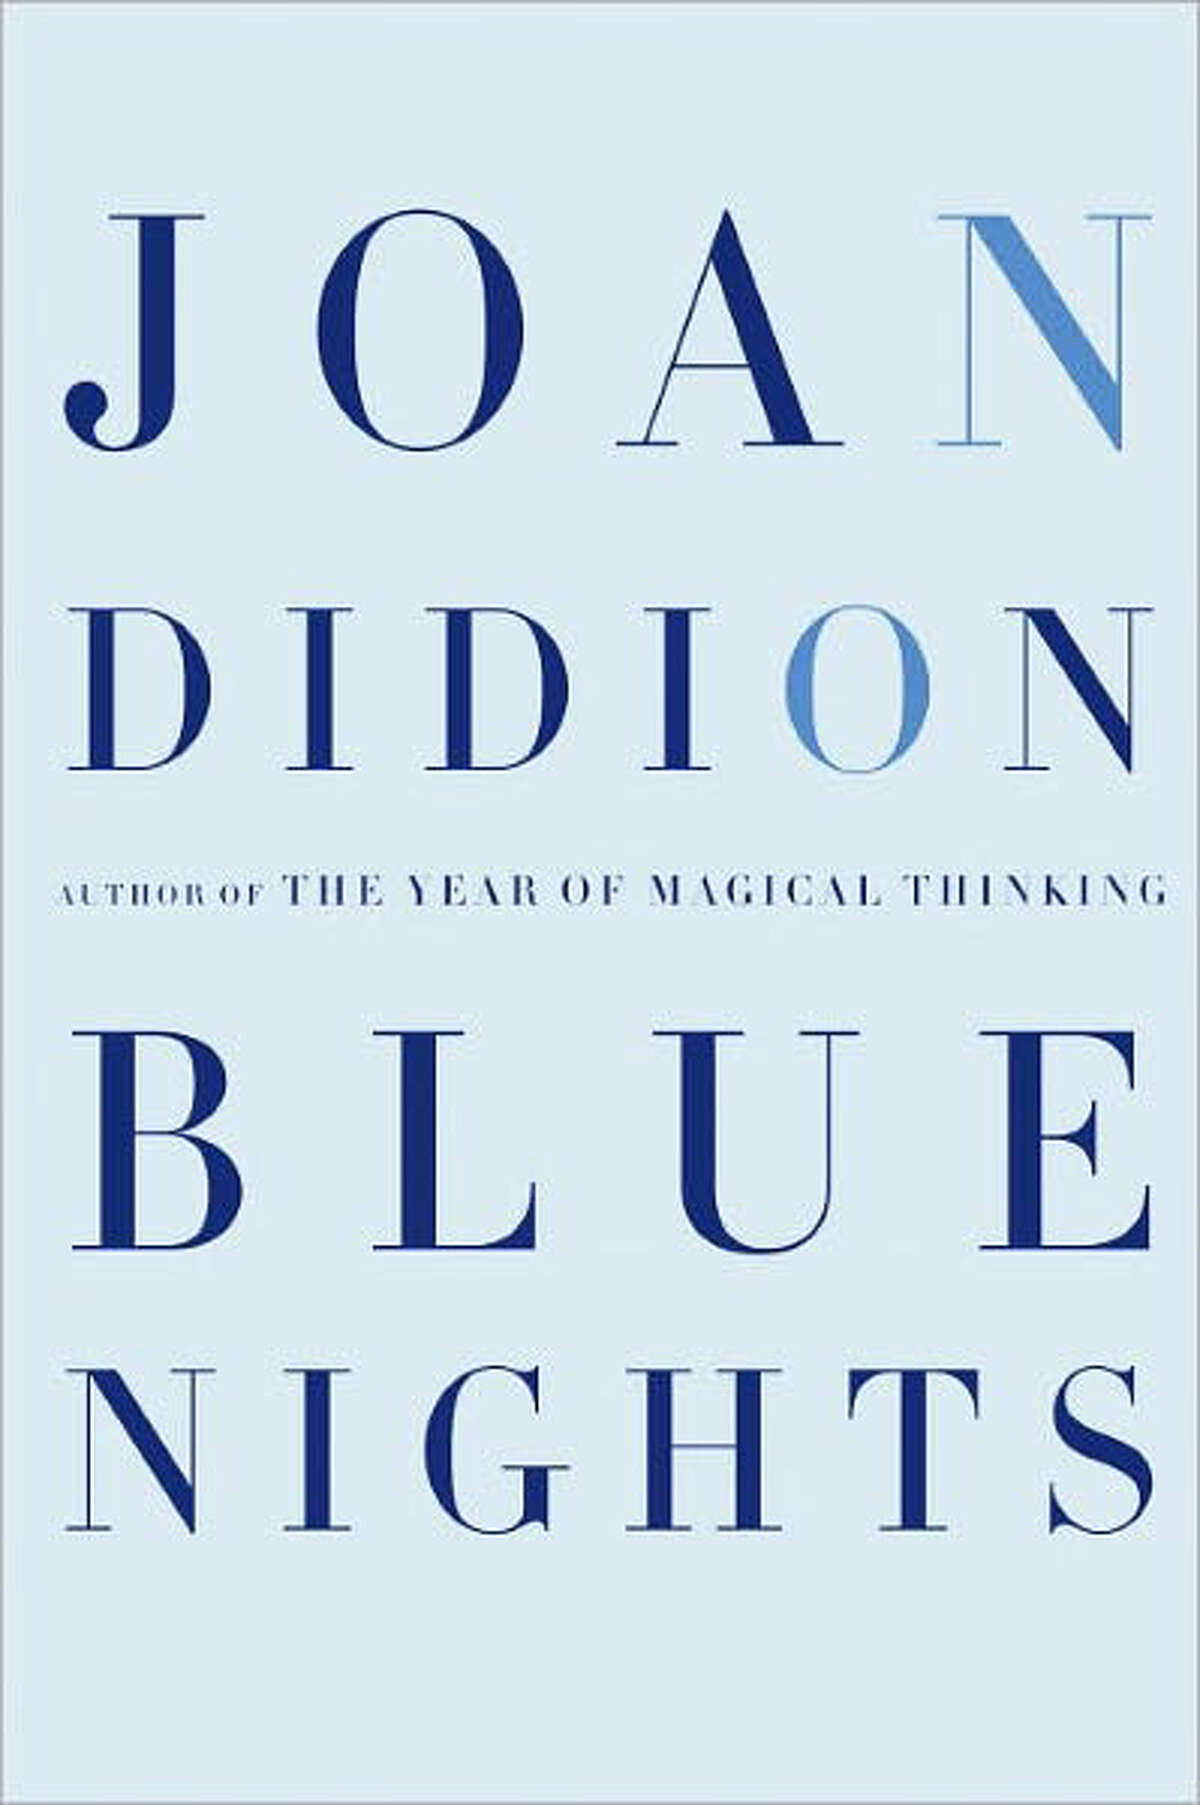 Joan Didion will be at Fairfield University June 7 to talk about her recent memoir "Blue Nights" about the death of her daughter.